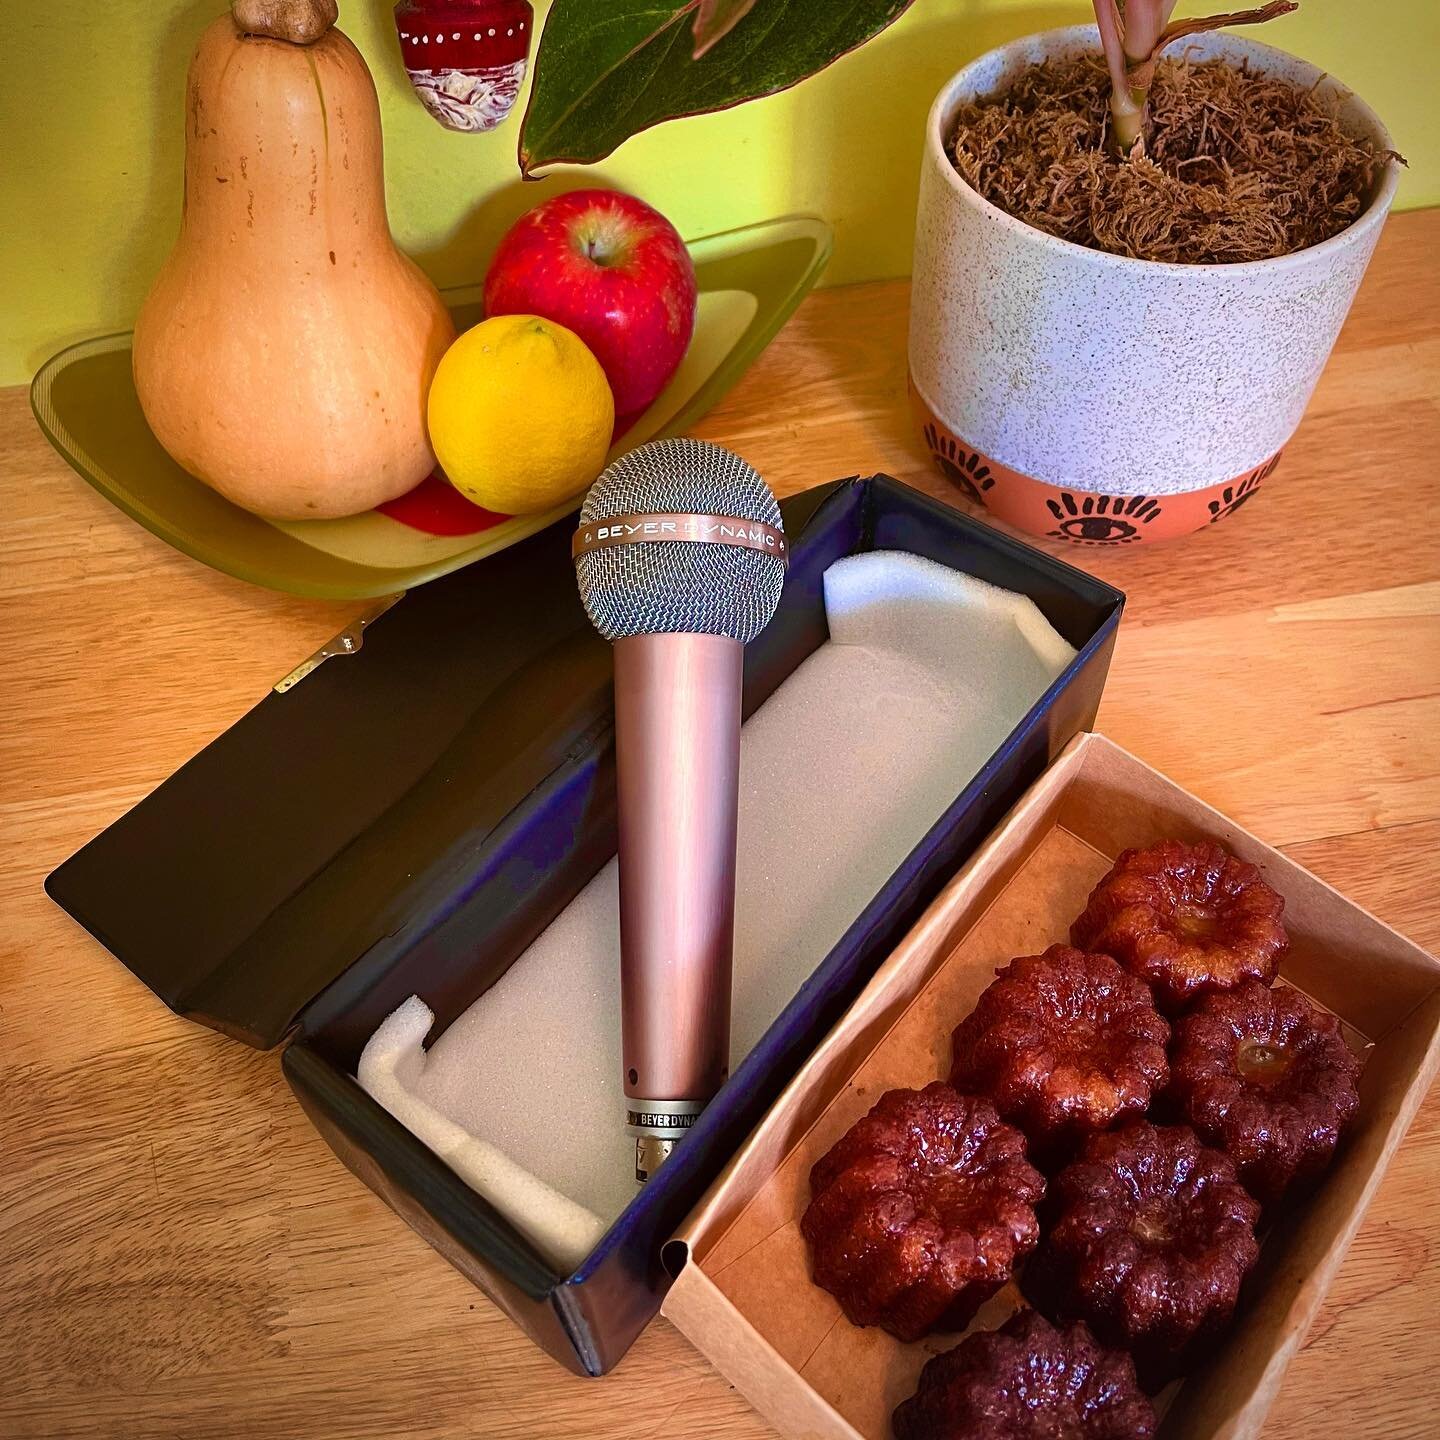 Ordered Canel&eacute;s from my favorite bakery in 🇫🇷 and they came with this groovy pink #vintagemicrophone 🎙

Thanks @infernalemachine 

@beyerdynamic M500 why is it pink?

#ribbonmic #canel&eacute; #bordeaux #producerlife